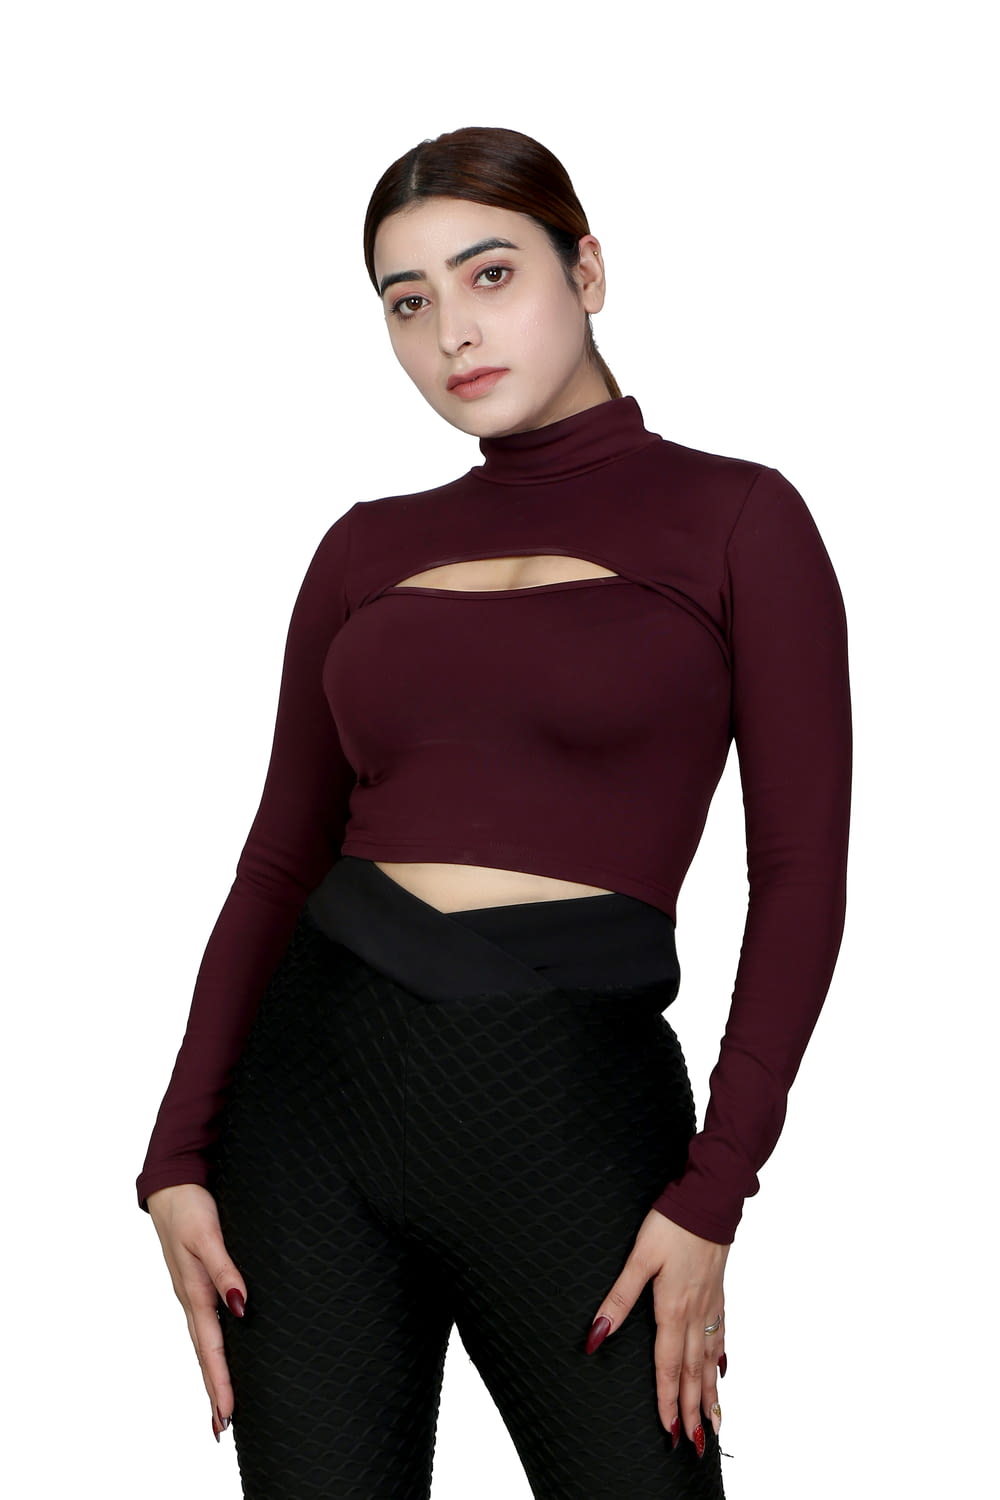 a woman in black pants and a maroon top